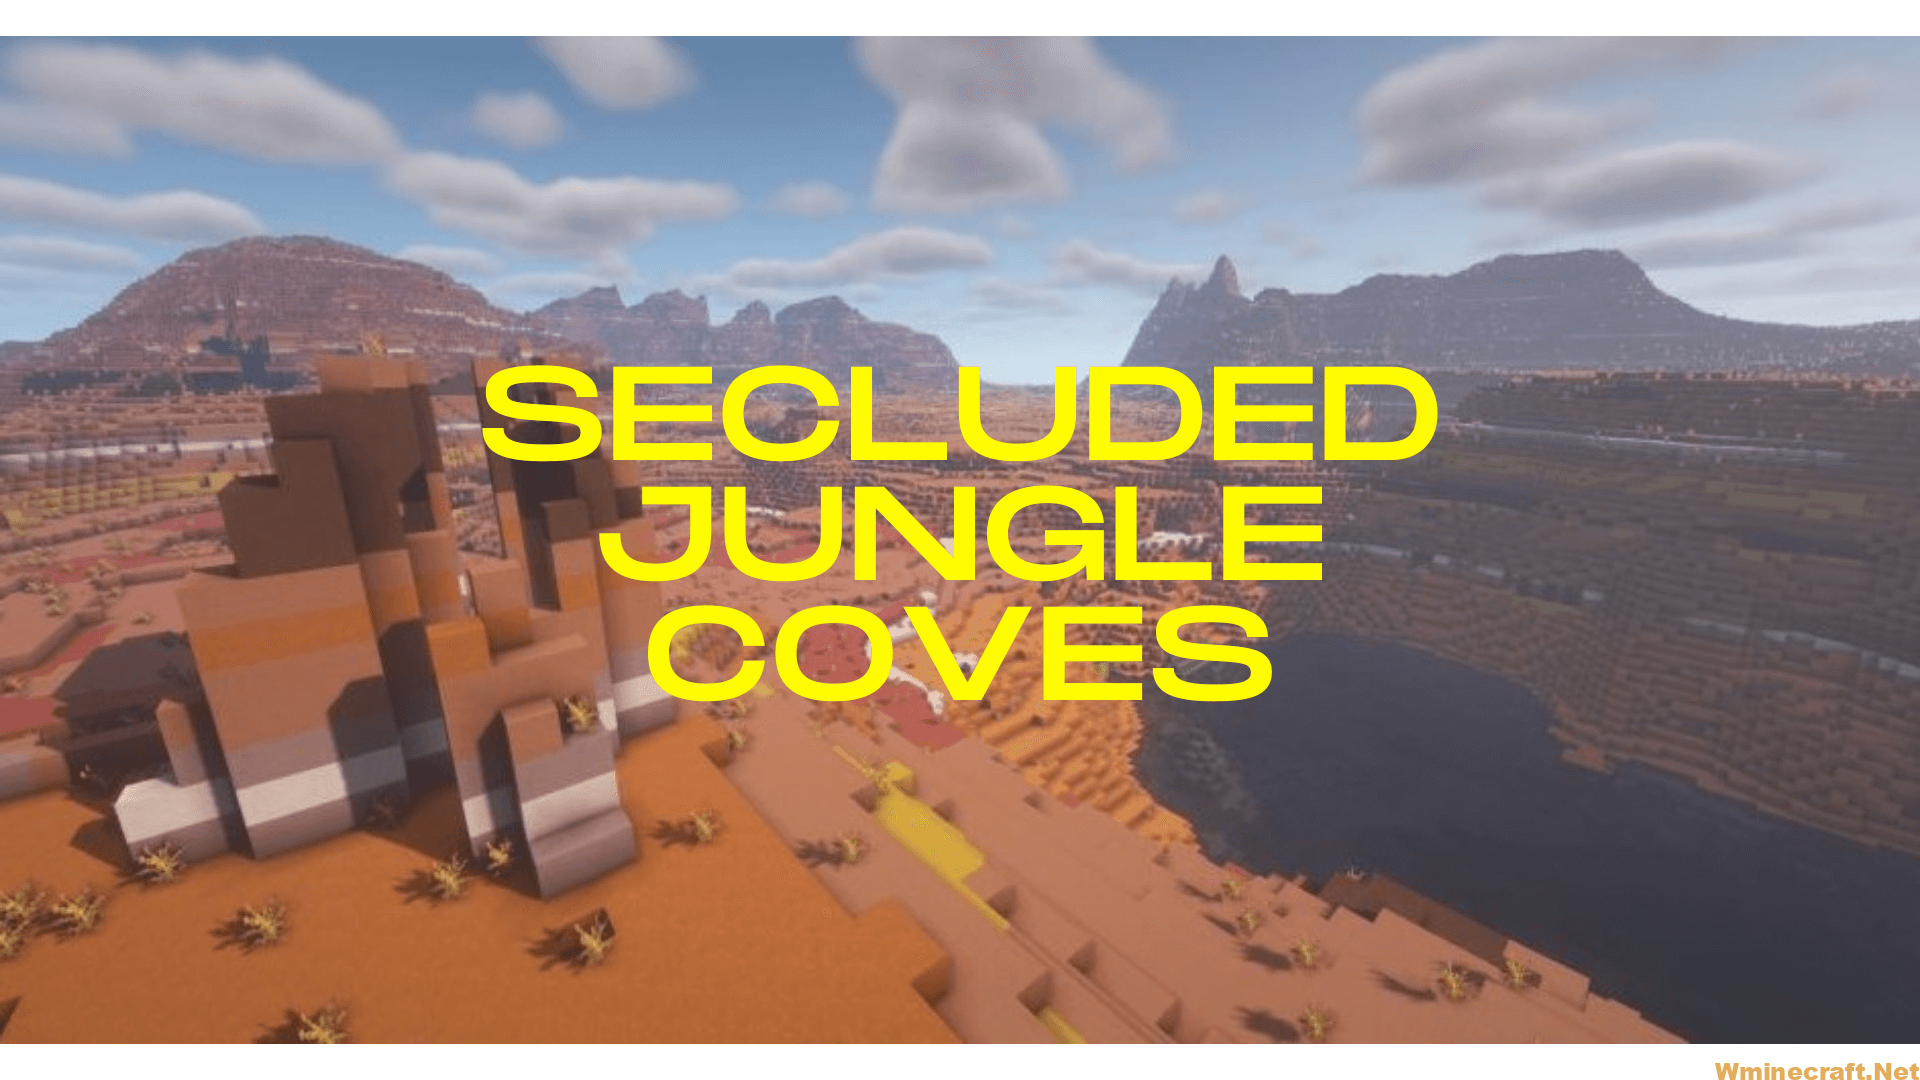 Secluded jungle coves